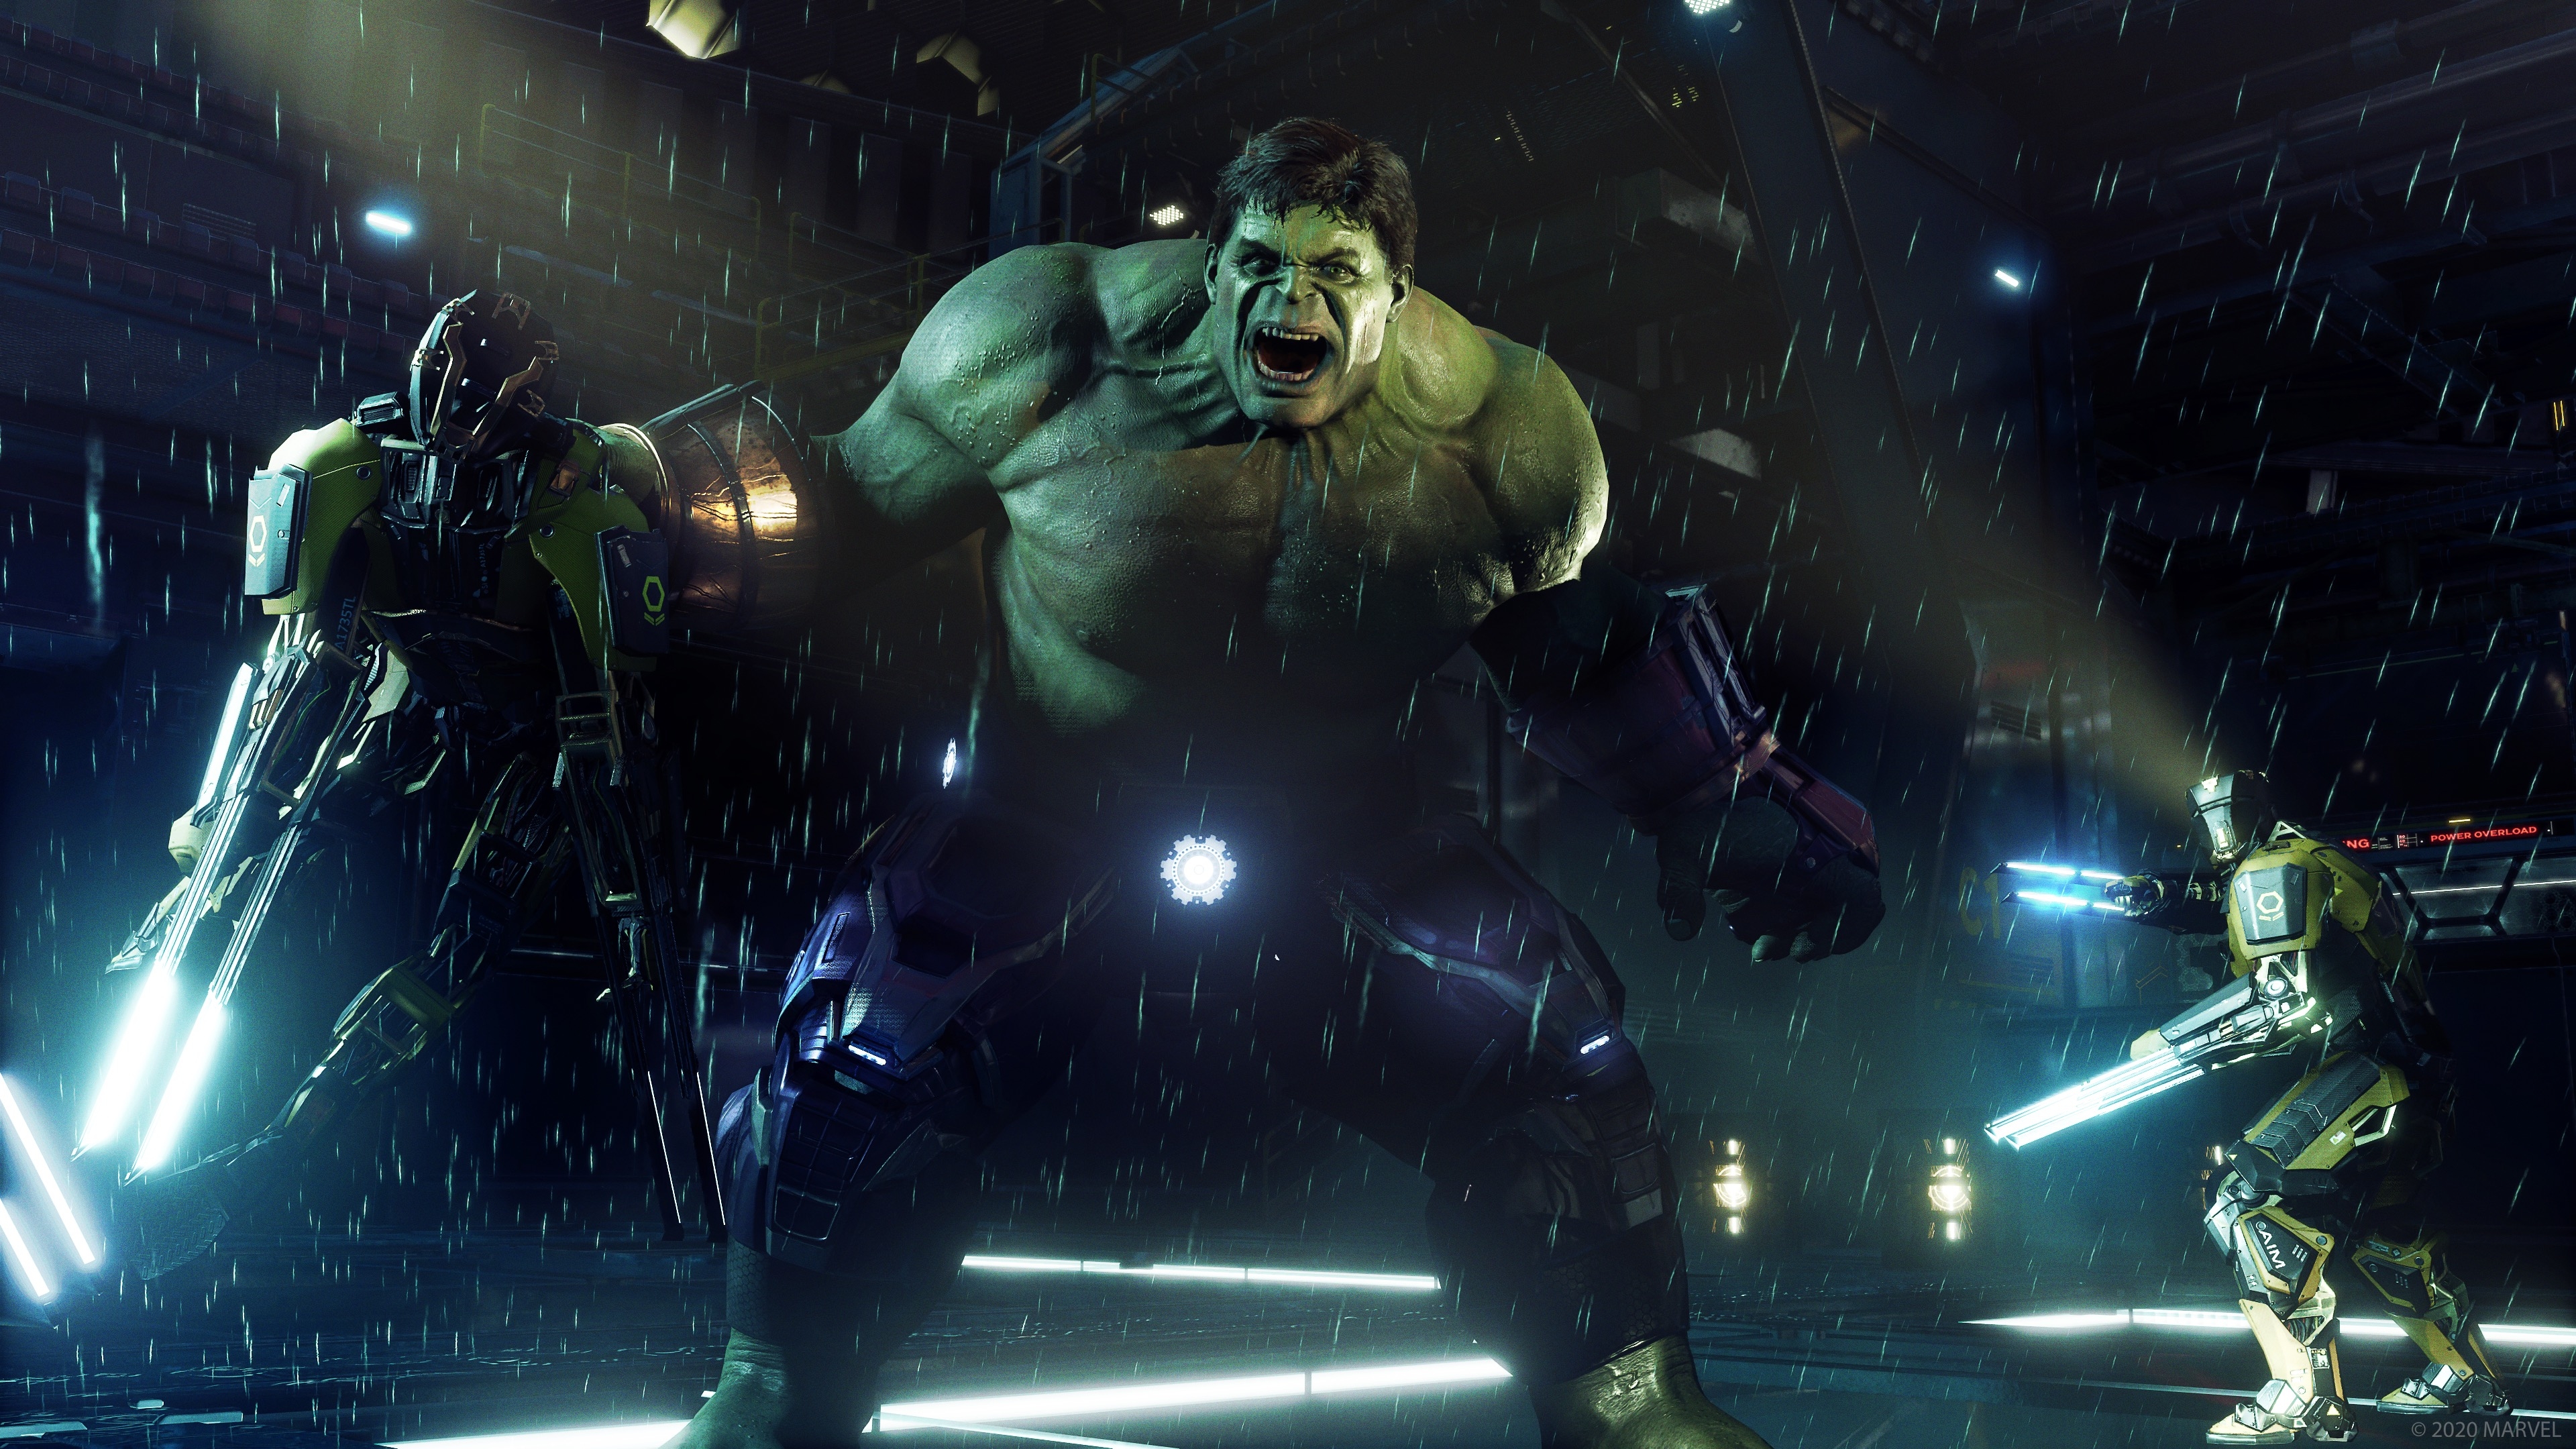 Download Hulk wallpapers for mobile phone free Hulk HD pictures